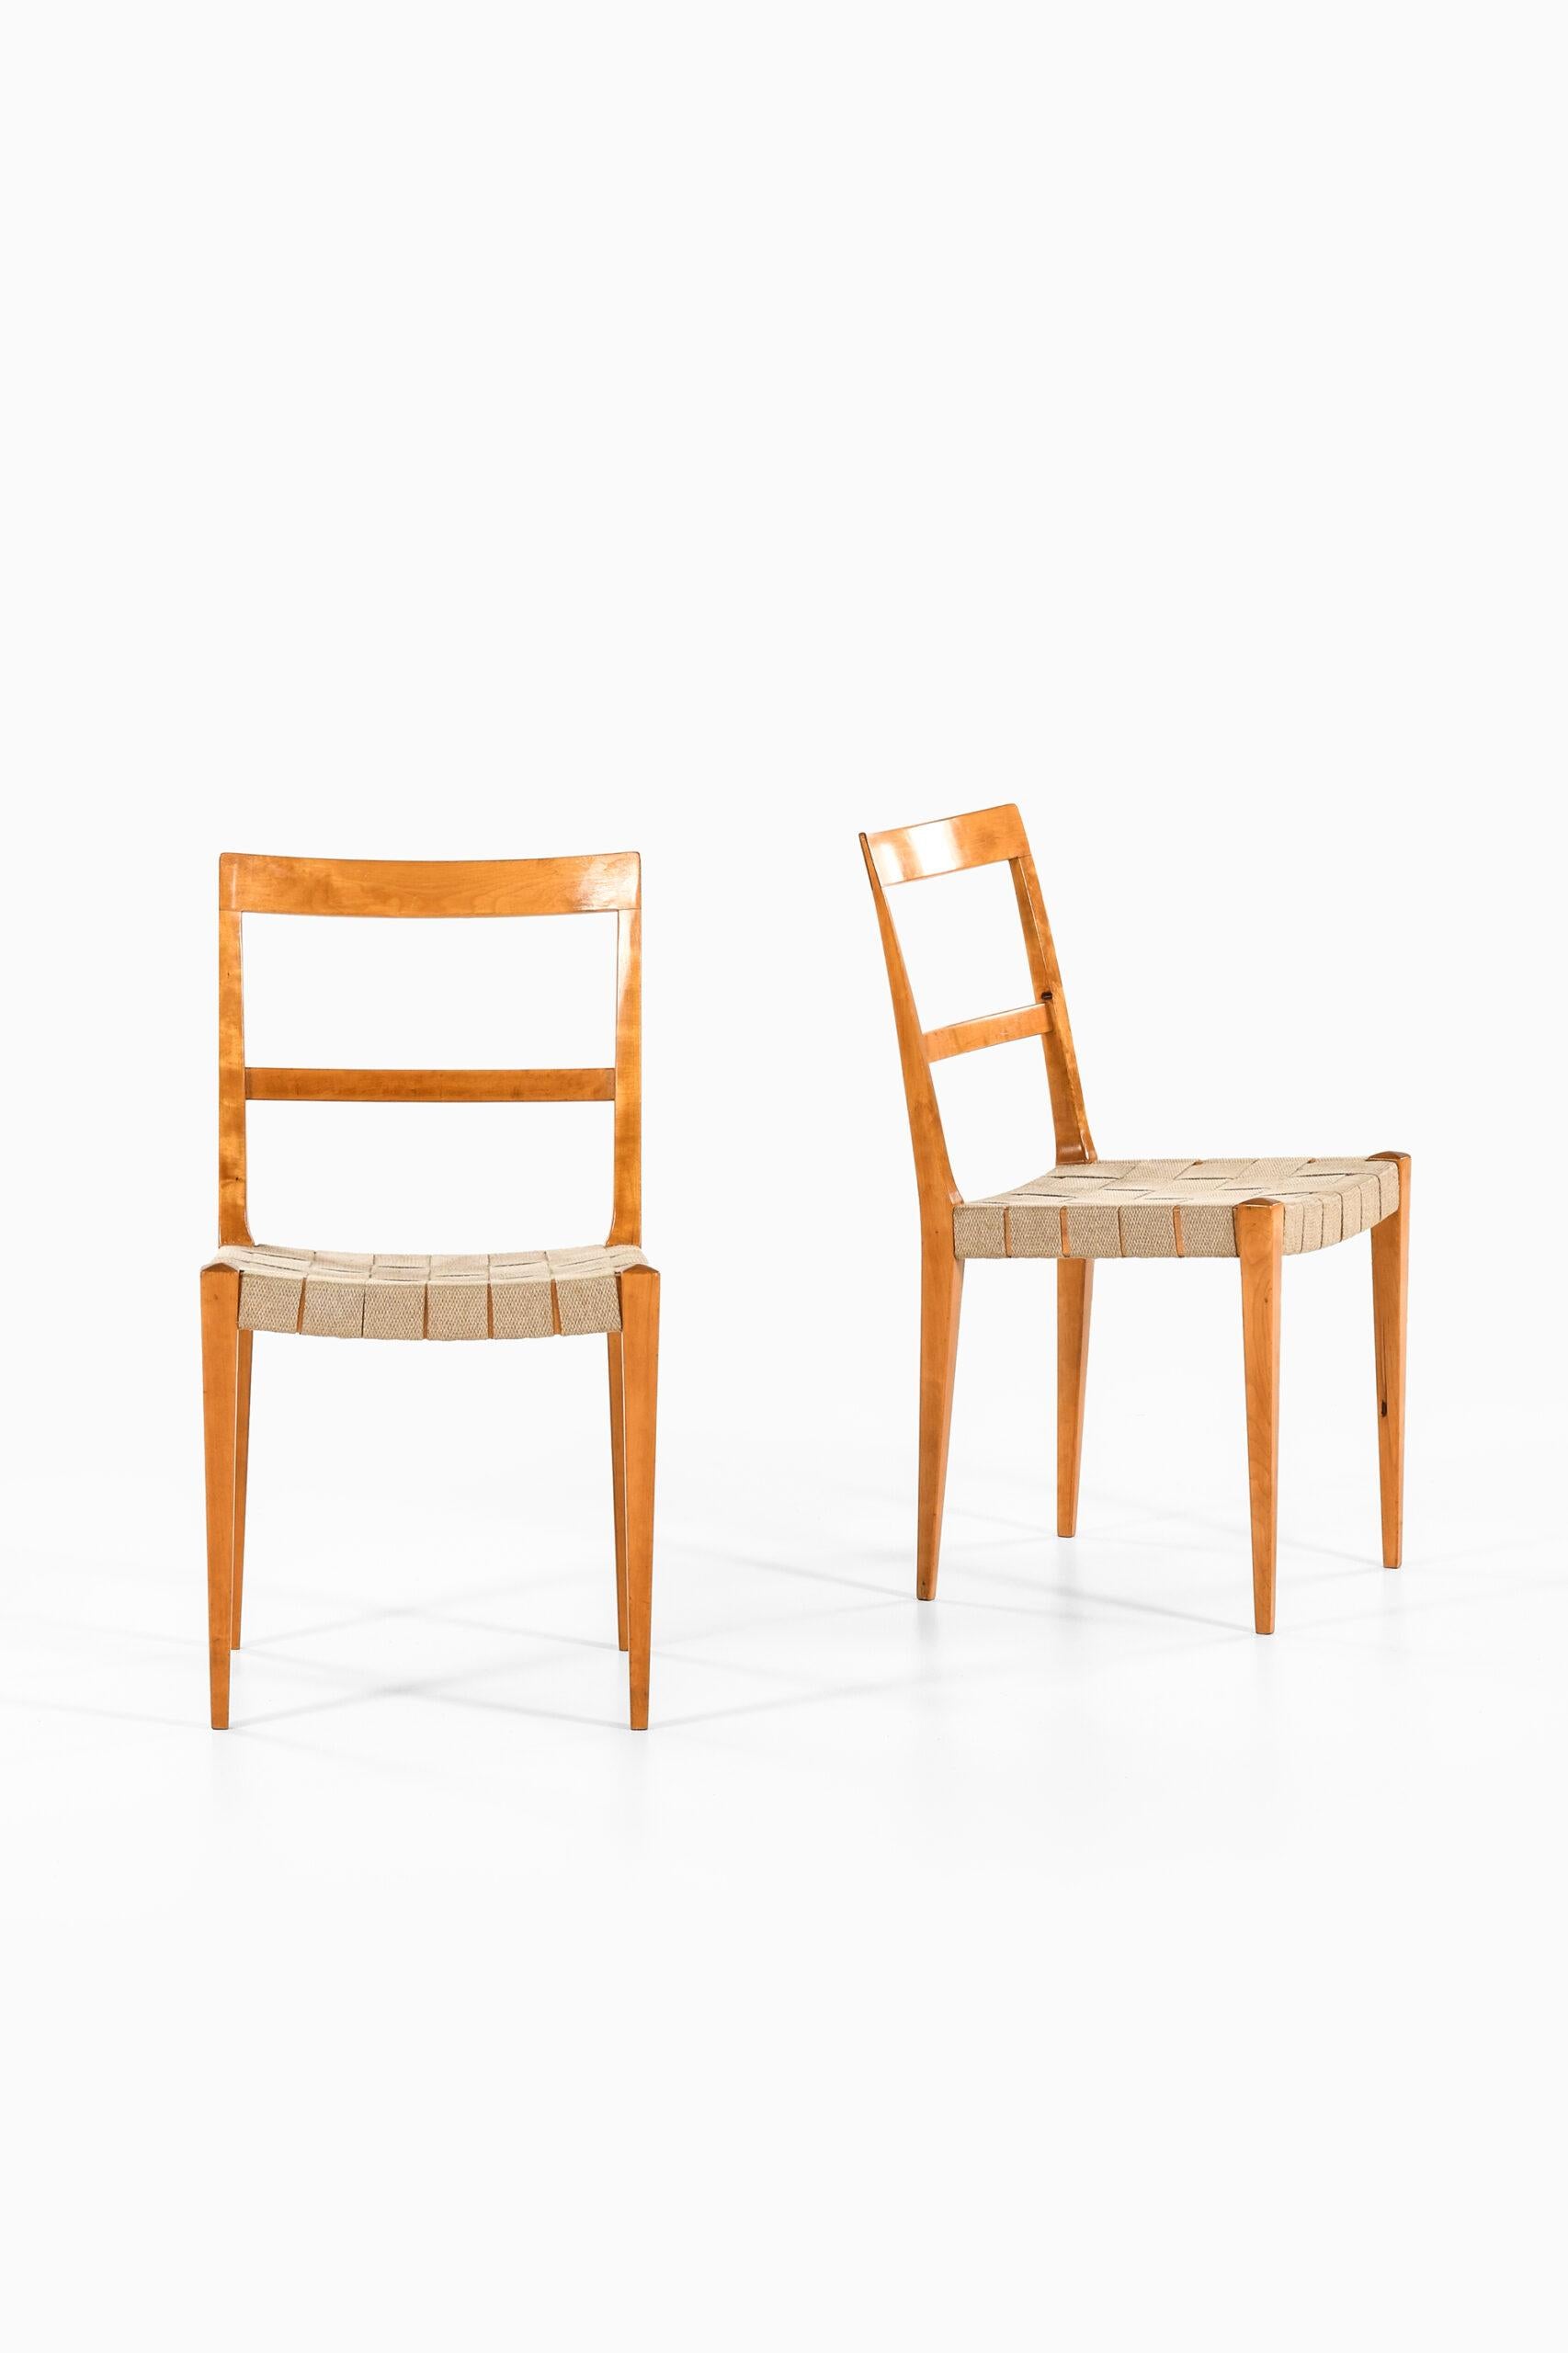 Very rare set of 5 dining chairs model Mimat designed by Bruno Mathsson. Produced by Karl Mathsson in Värnamo, Sweden.